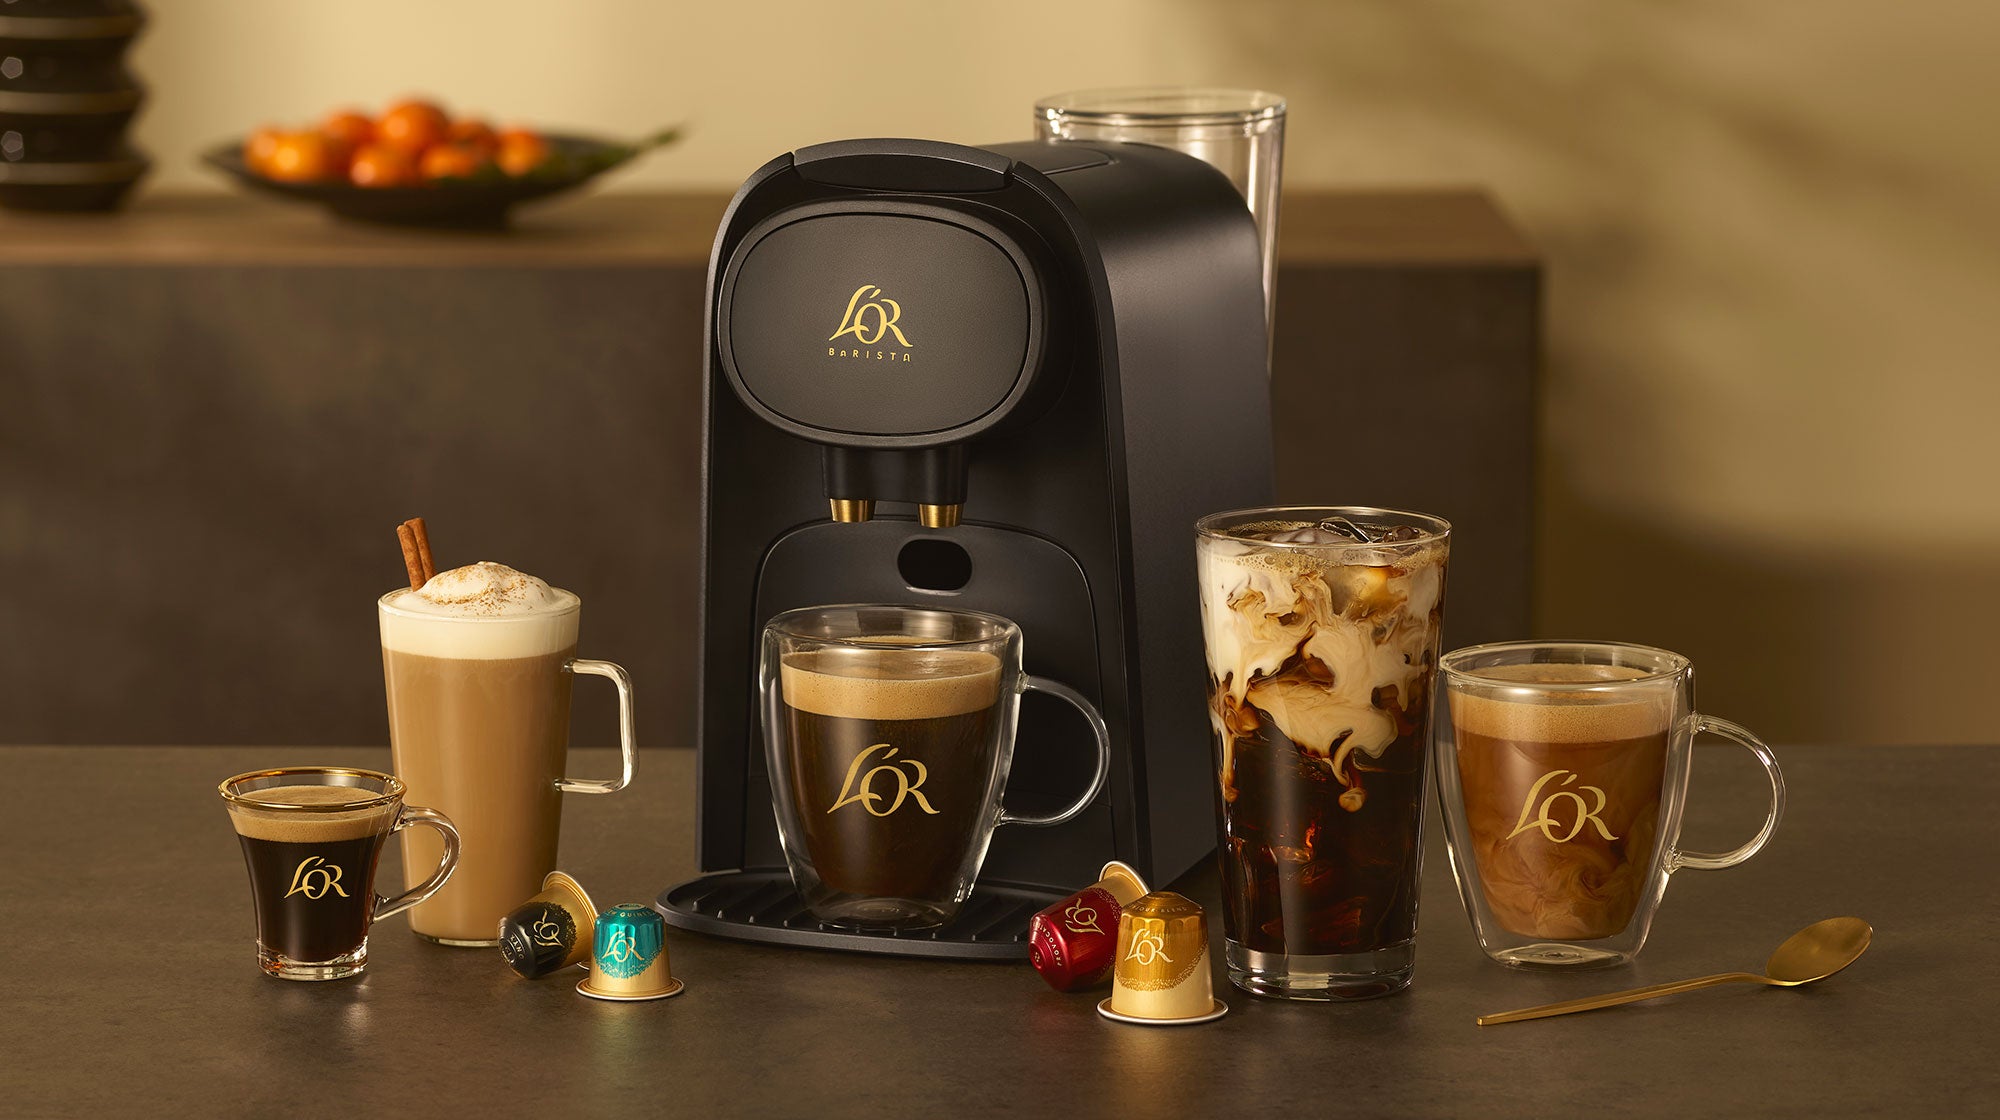 Image of L'OR BARISTA System with various coffee and espresso beverages. 